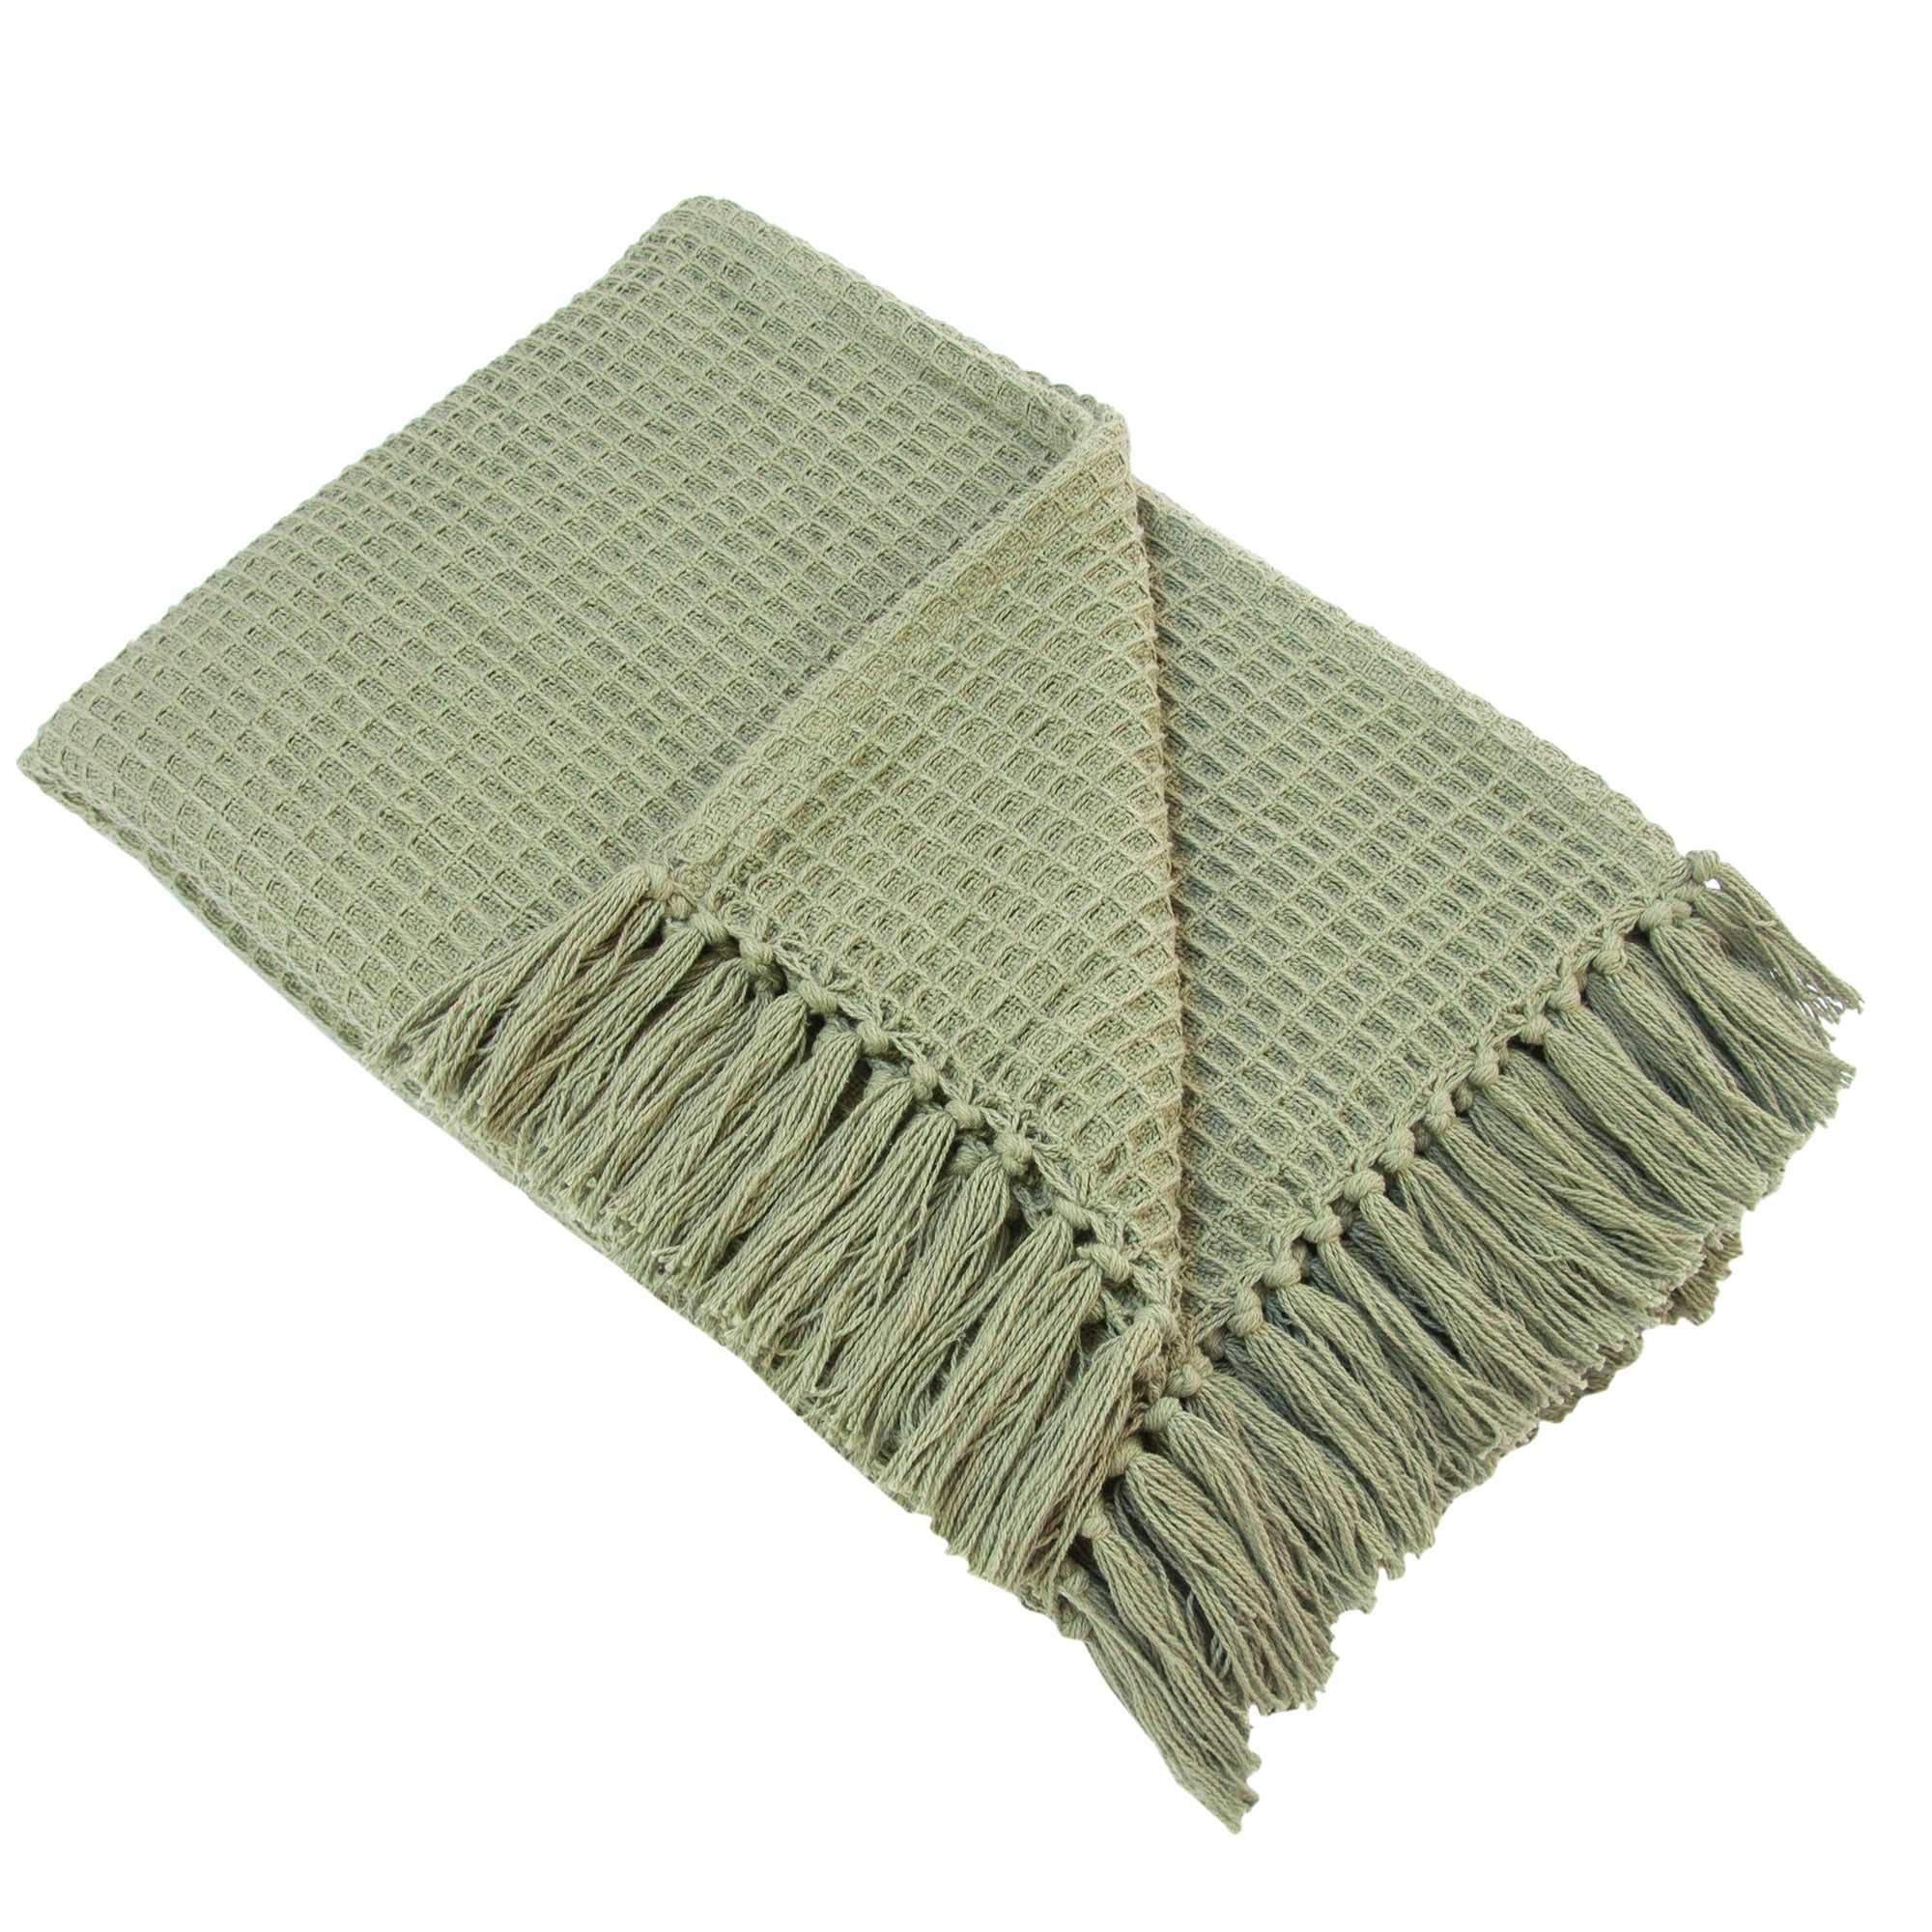 Bruges - Waffle Throw in Khaki - By Appletree Loft